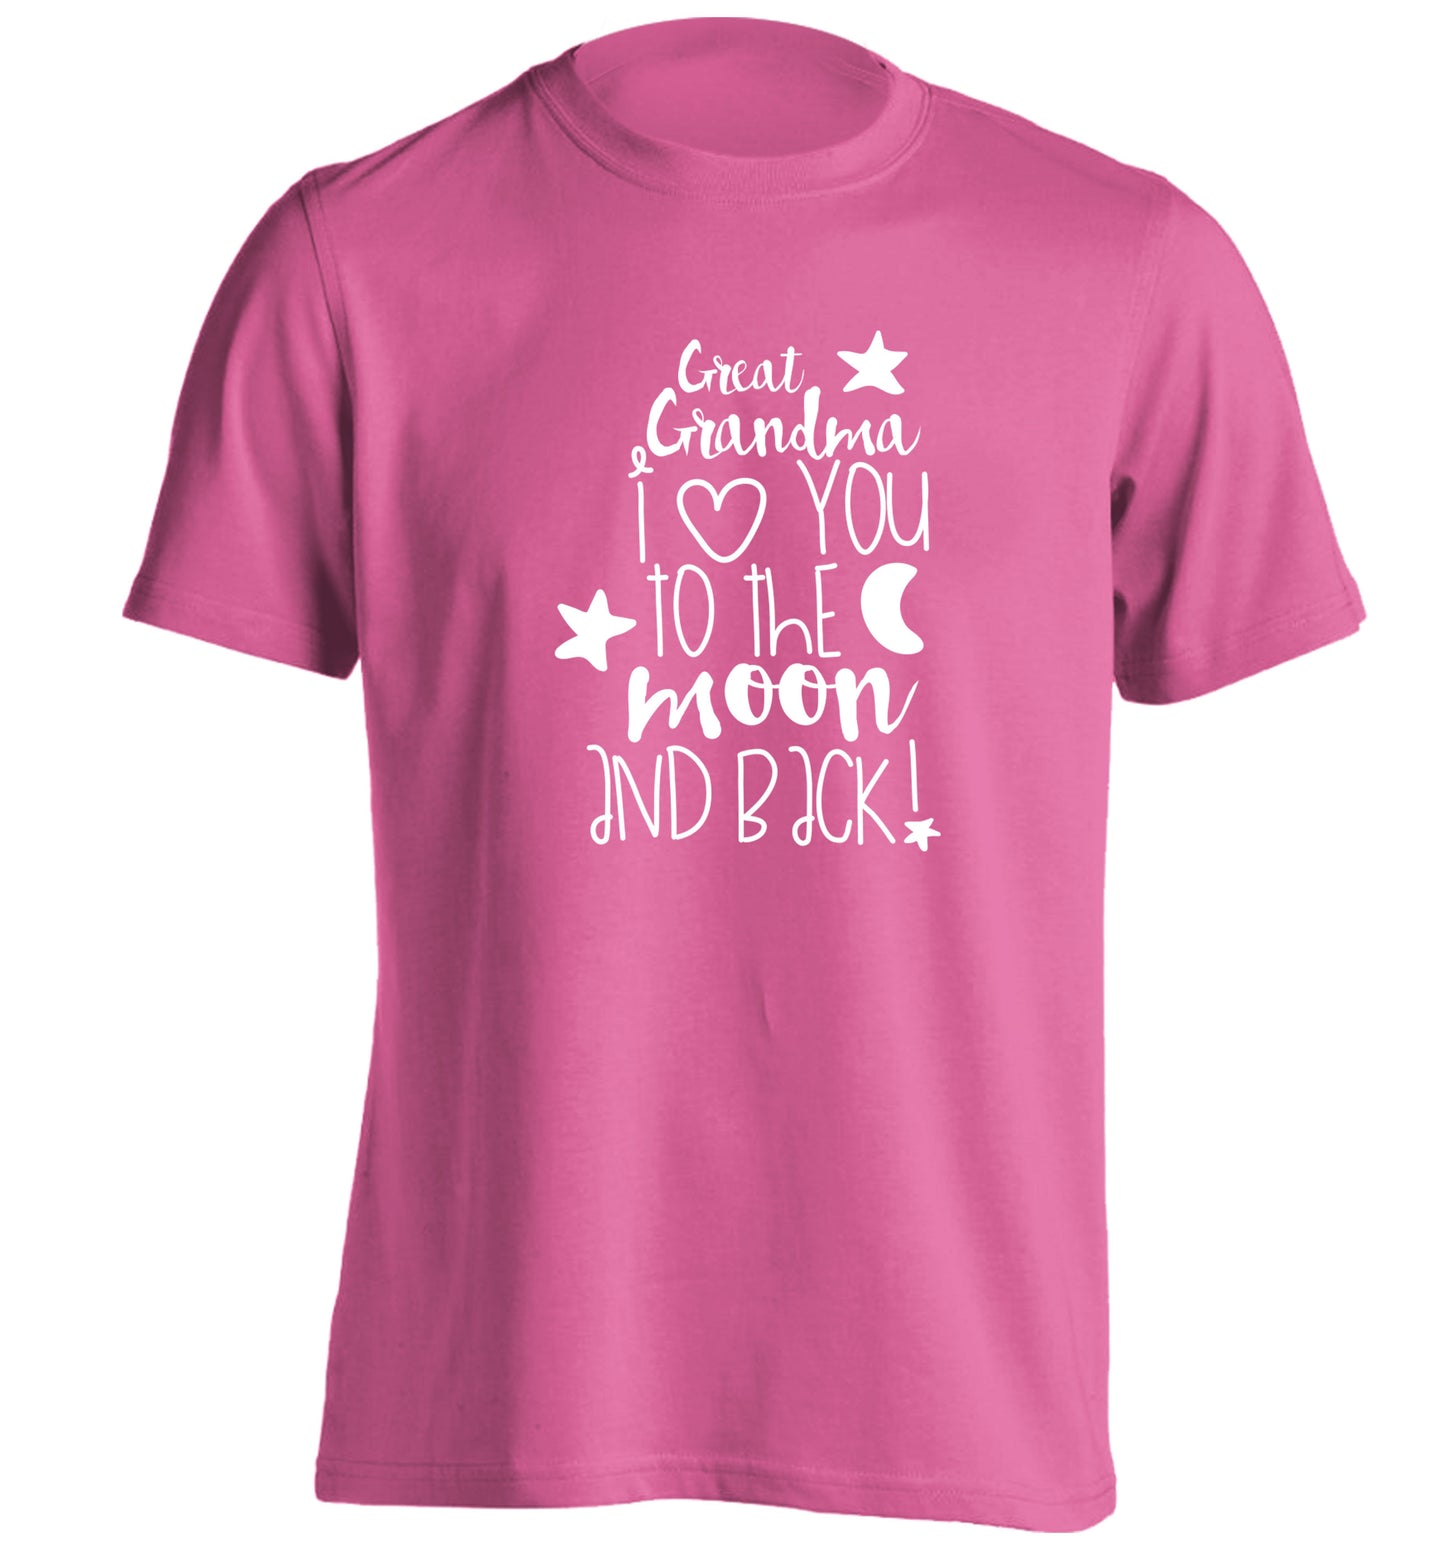 Great Grandma I love you to the moon and back adults unisex pink Tshirt 2XL